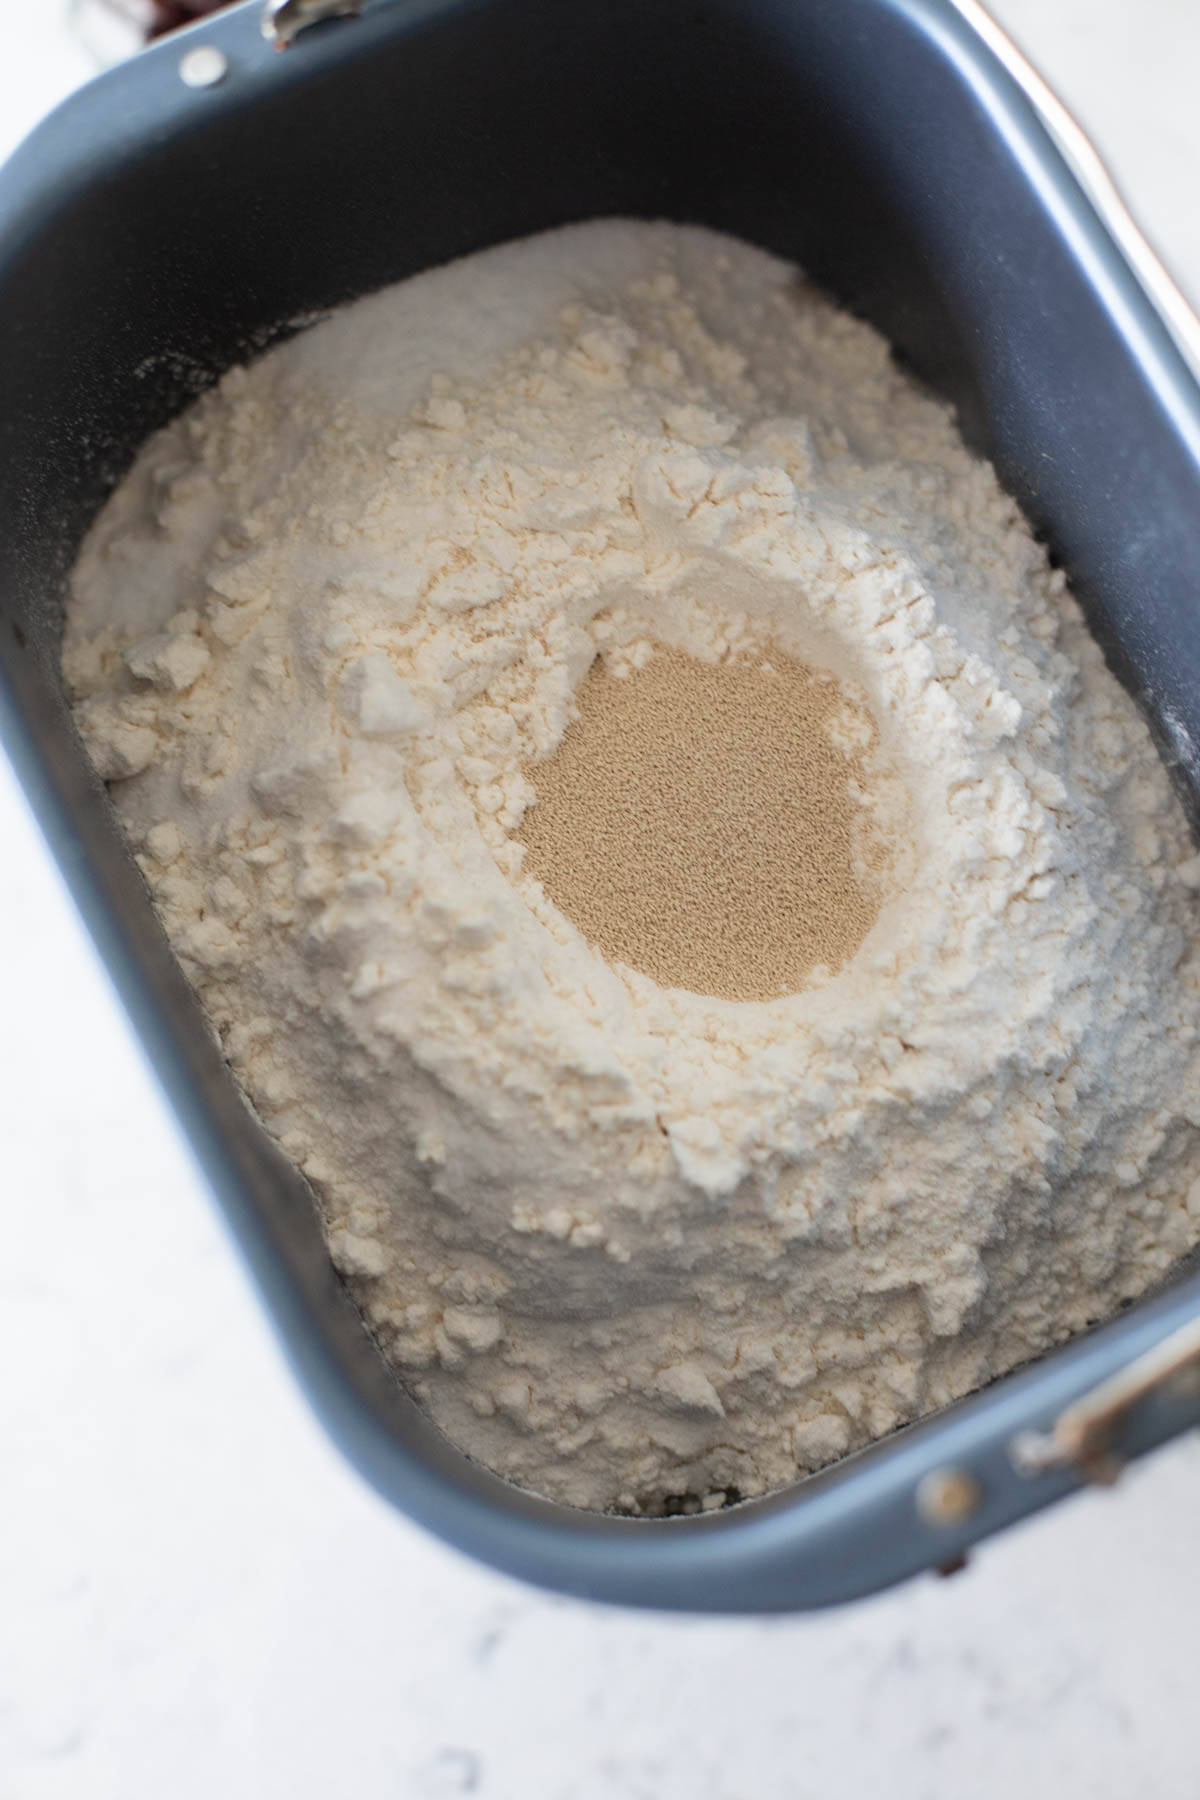 The bread pan is filled with flour and yeast.